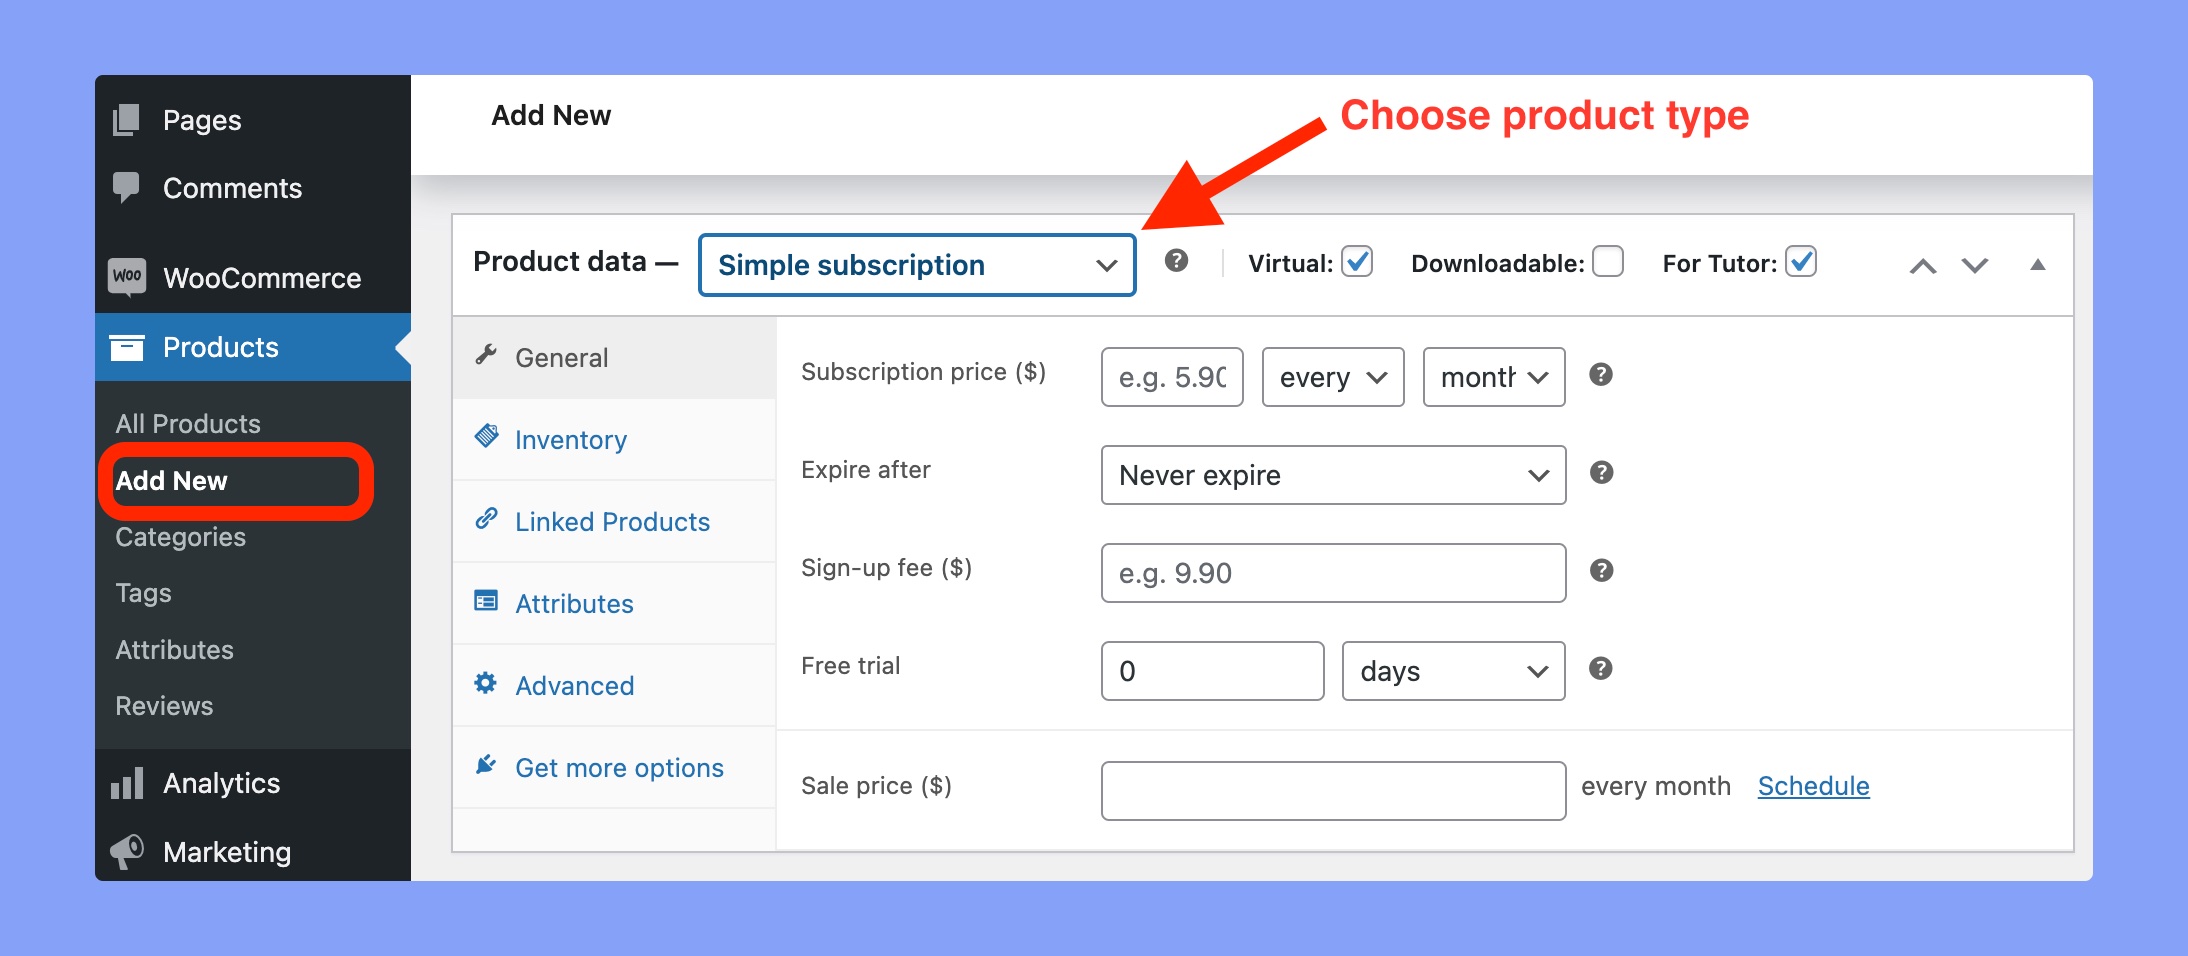 Choose "Simple subscription" as the product type